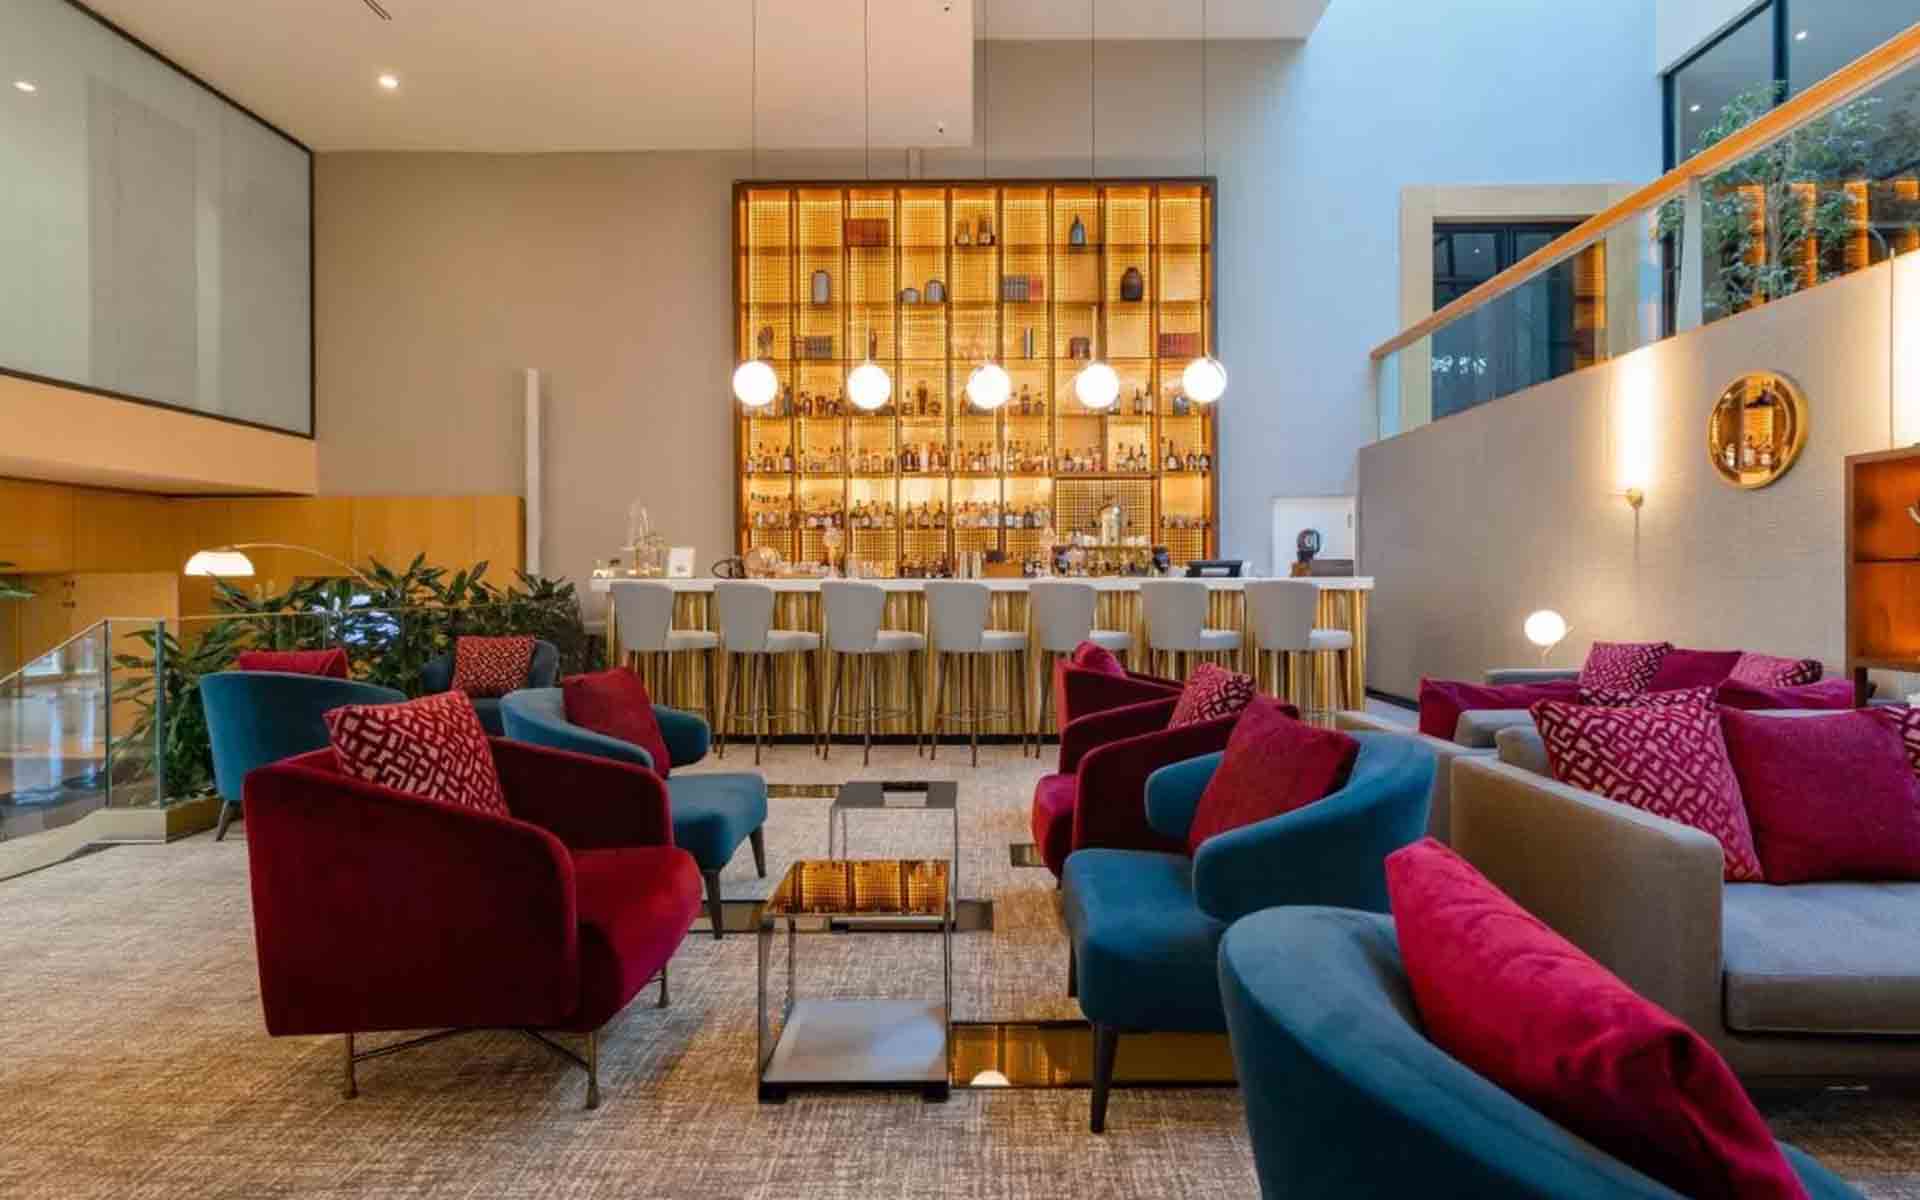 Intercontinental Hote Malta. Check rates and availability.